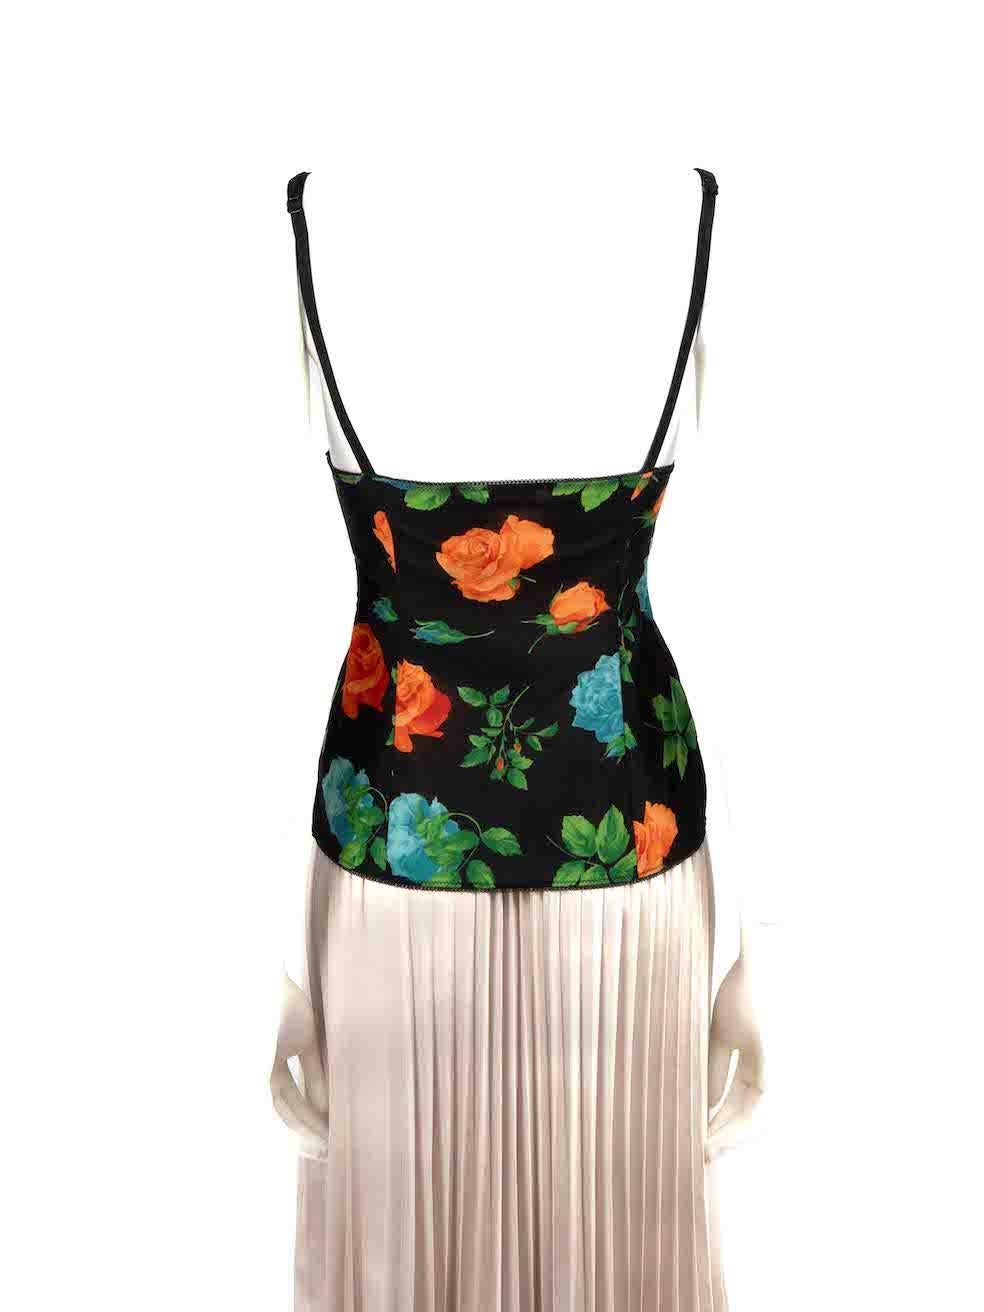 Dolce & Gabbana Dolce & Gabbana Floral Print Silk Camisole Top Size S In New Condition For Sale In London, GB